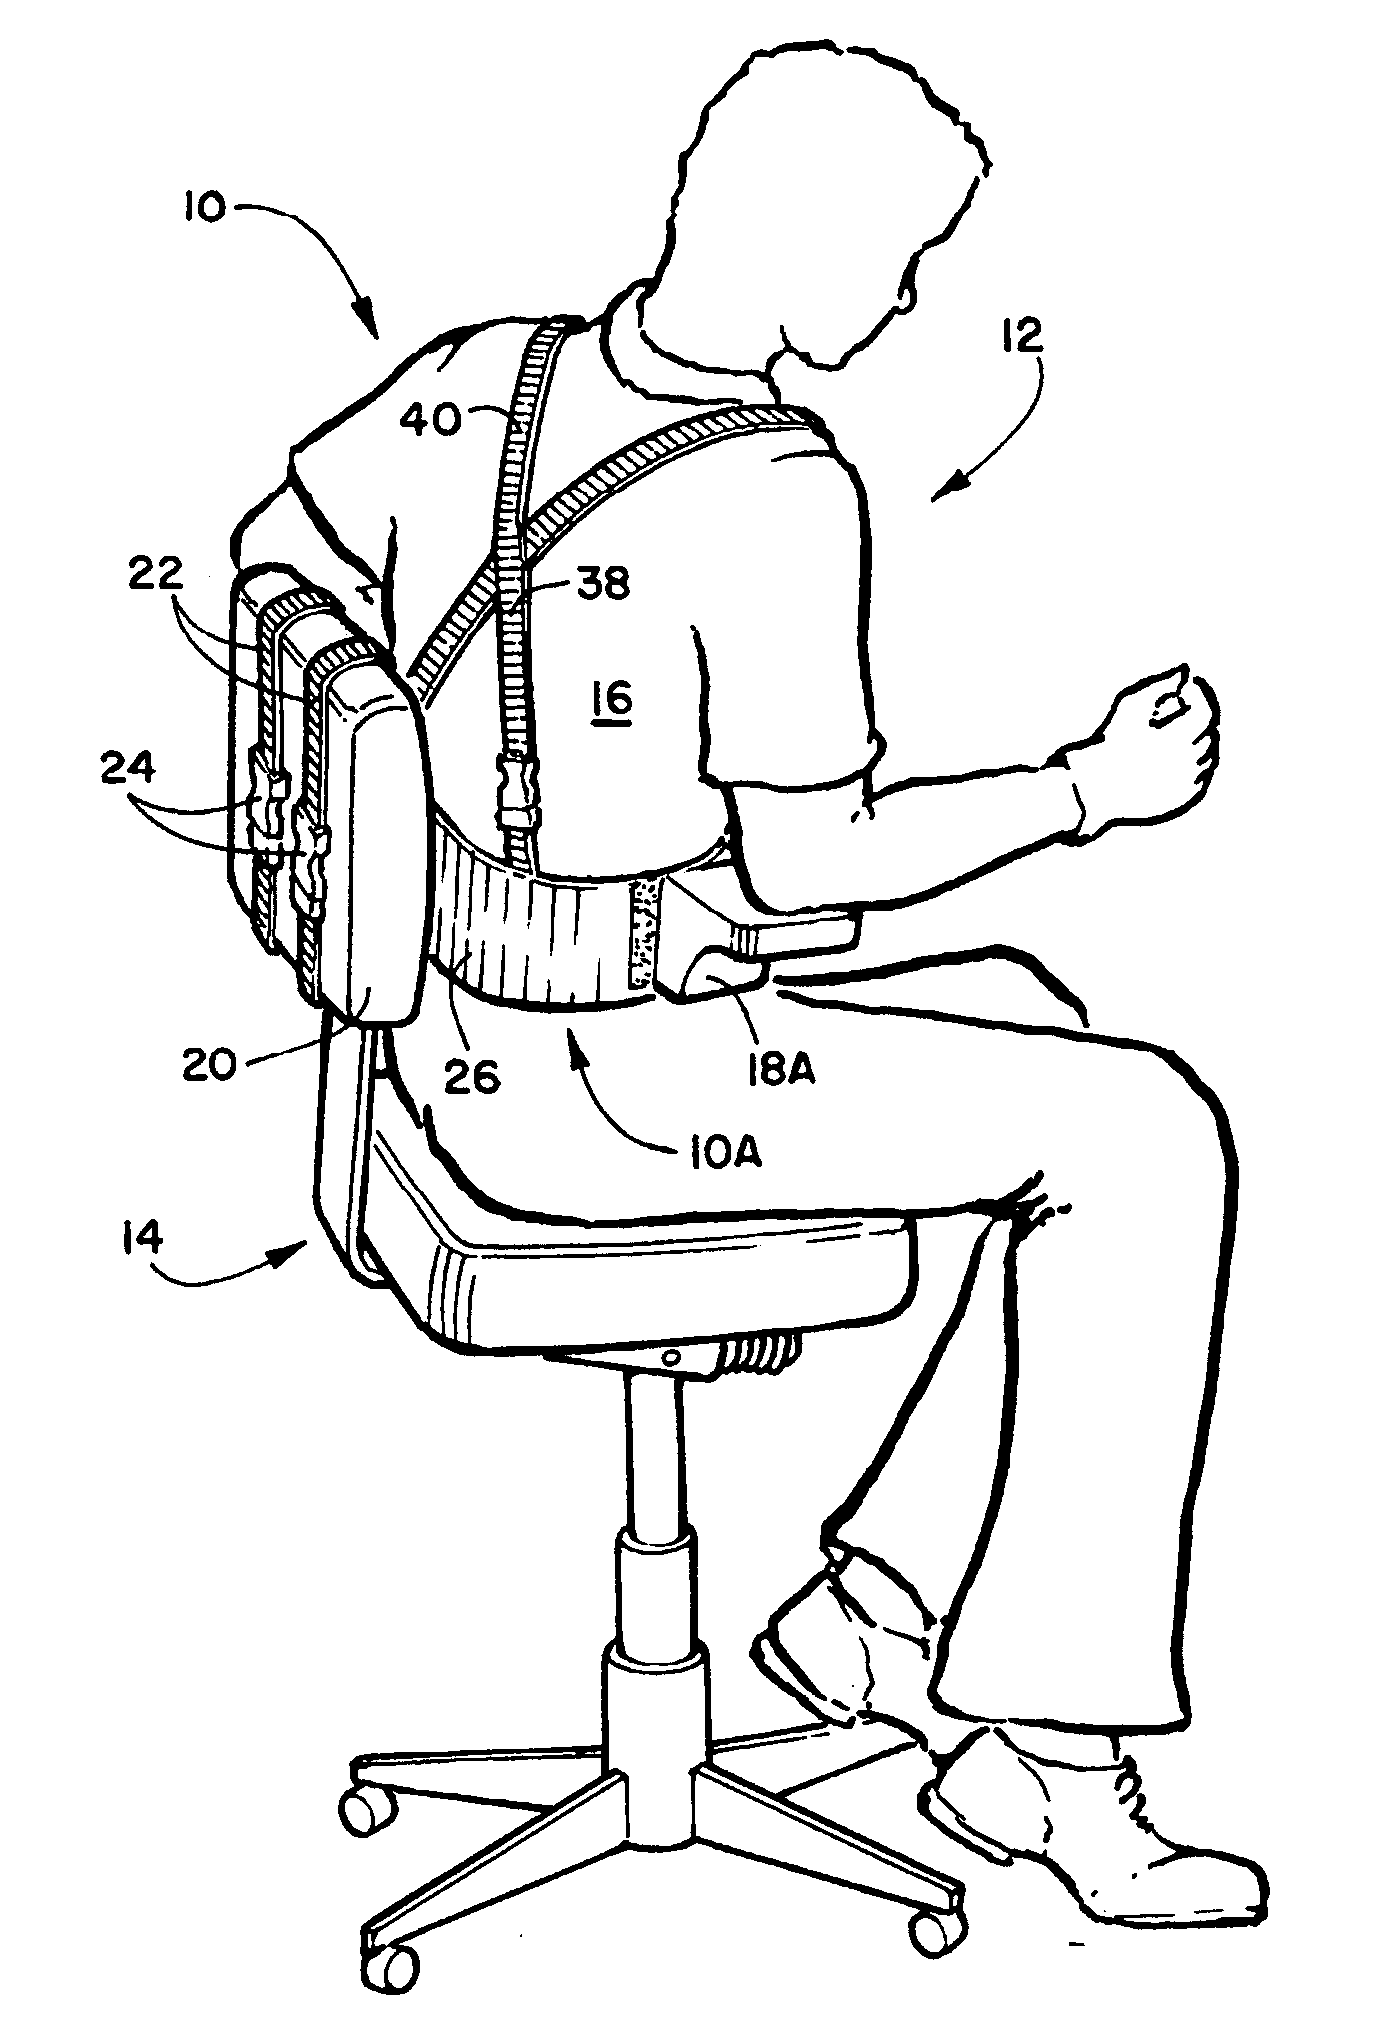 Chair mounted back support system